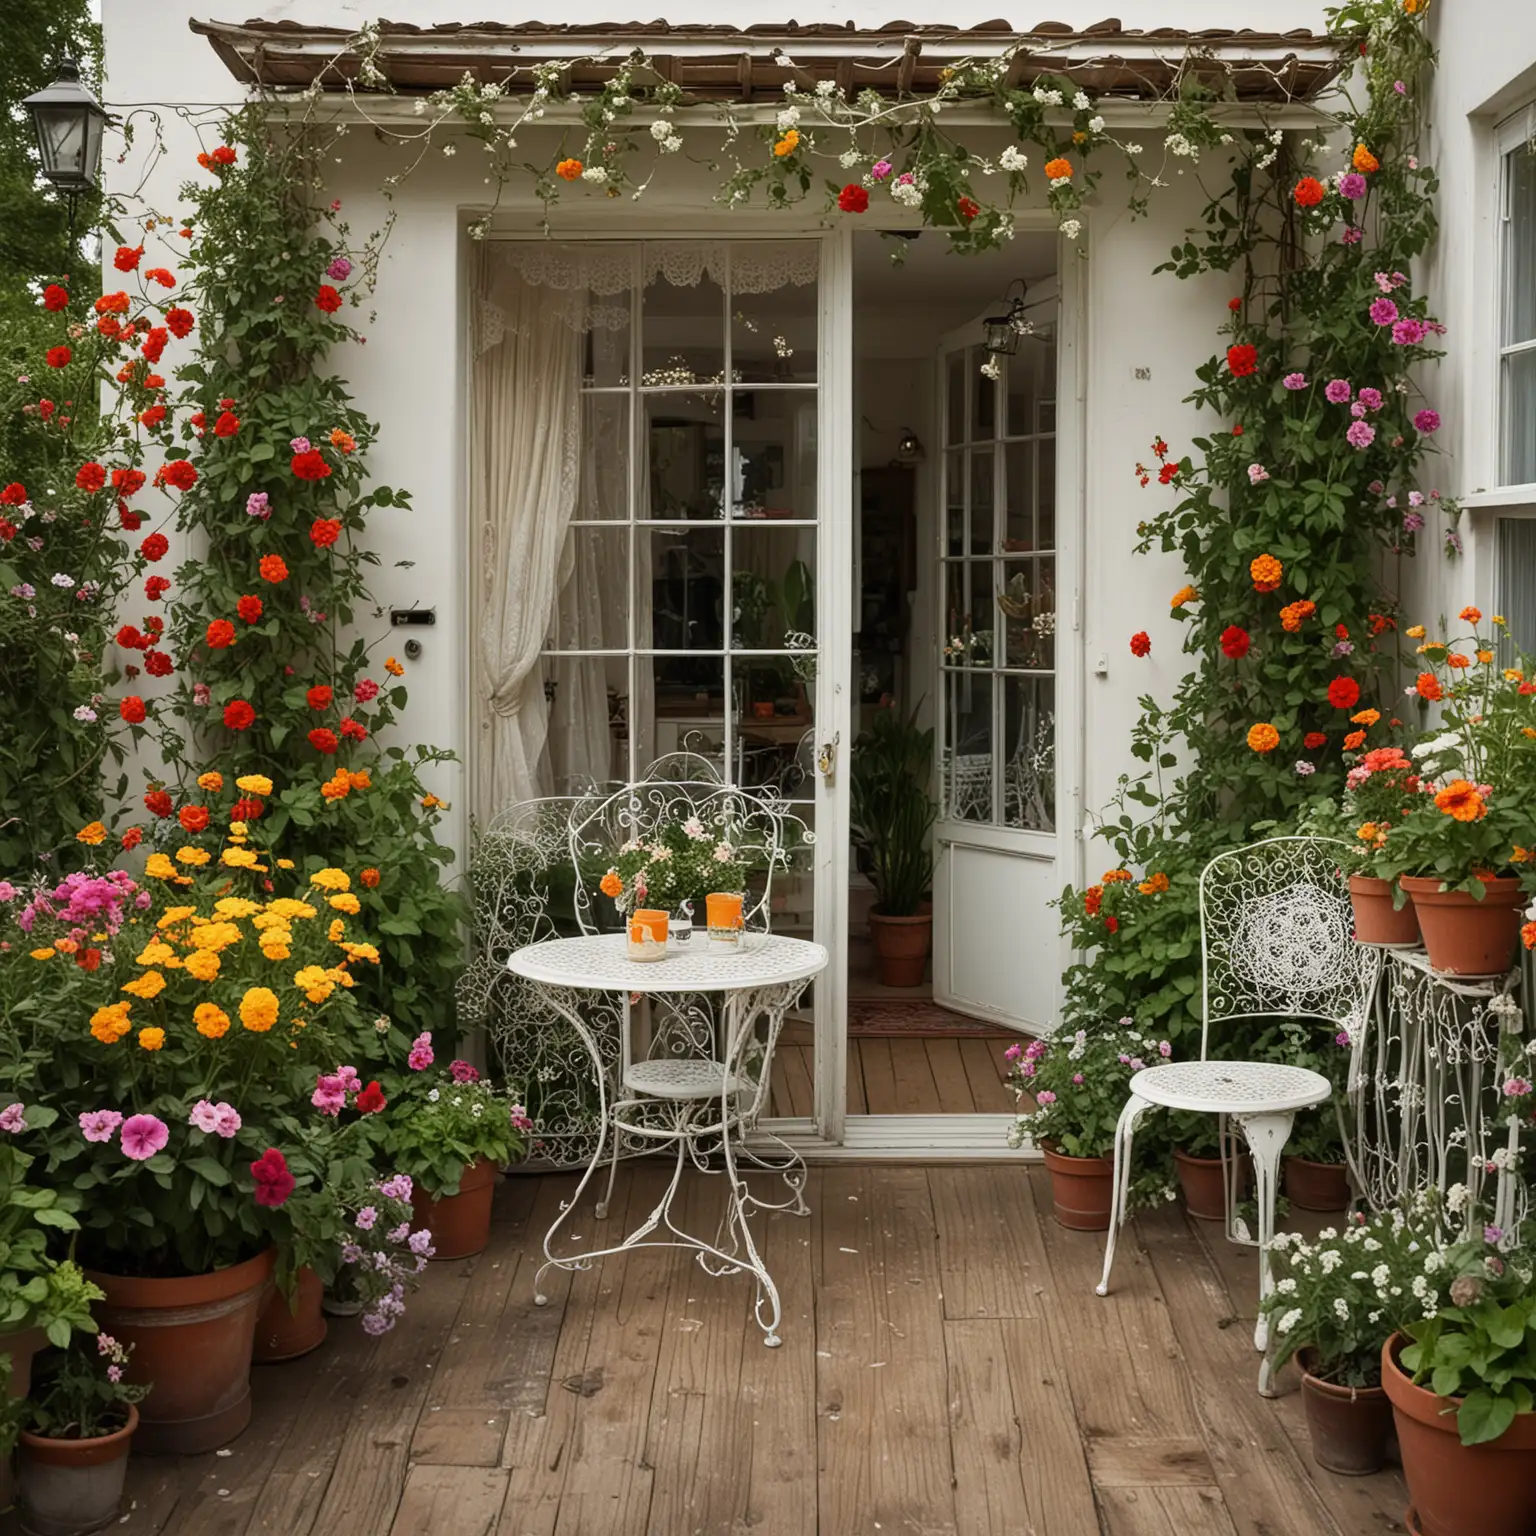 Enchanting-Garden-Balcony-with-Vintage-Furniture-and-Lush-Greenery